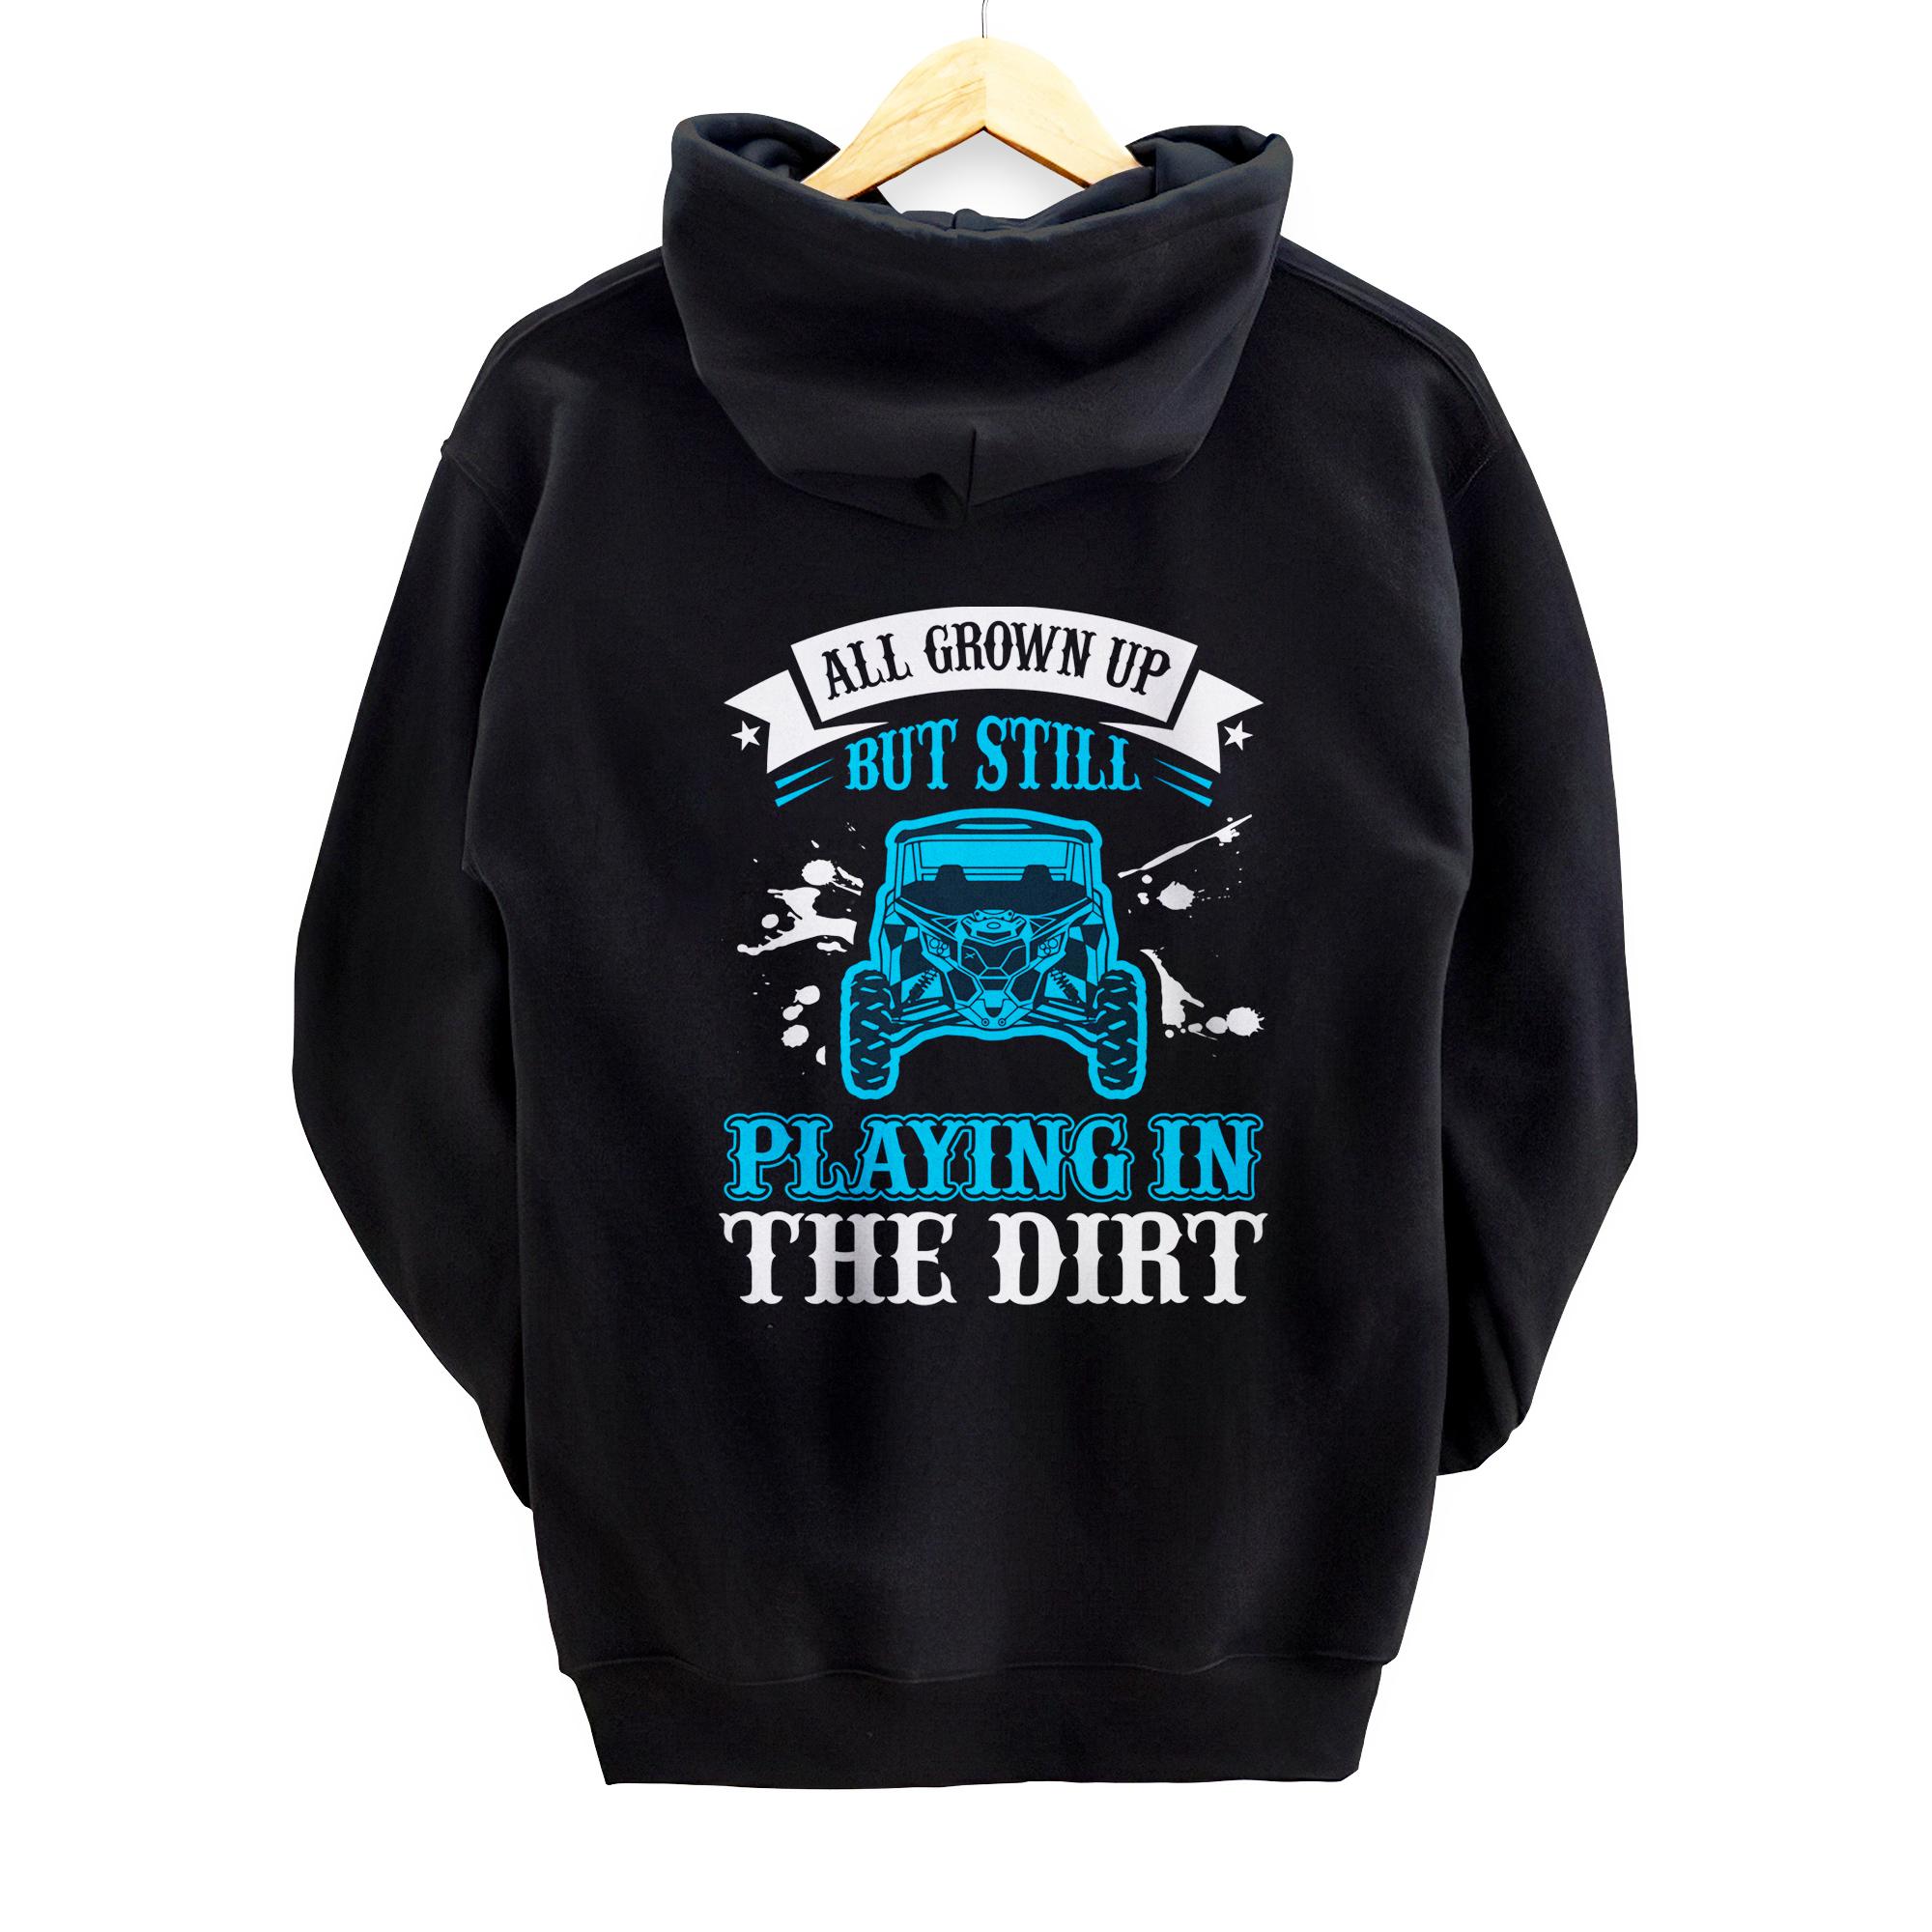 Personalized Playing in the dirt-blue sxs utv Pullover Hoodie